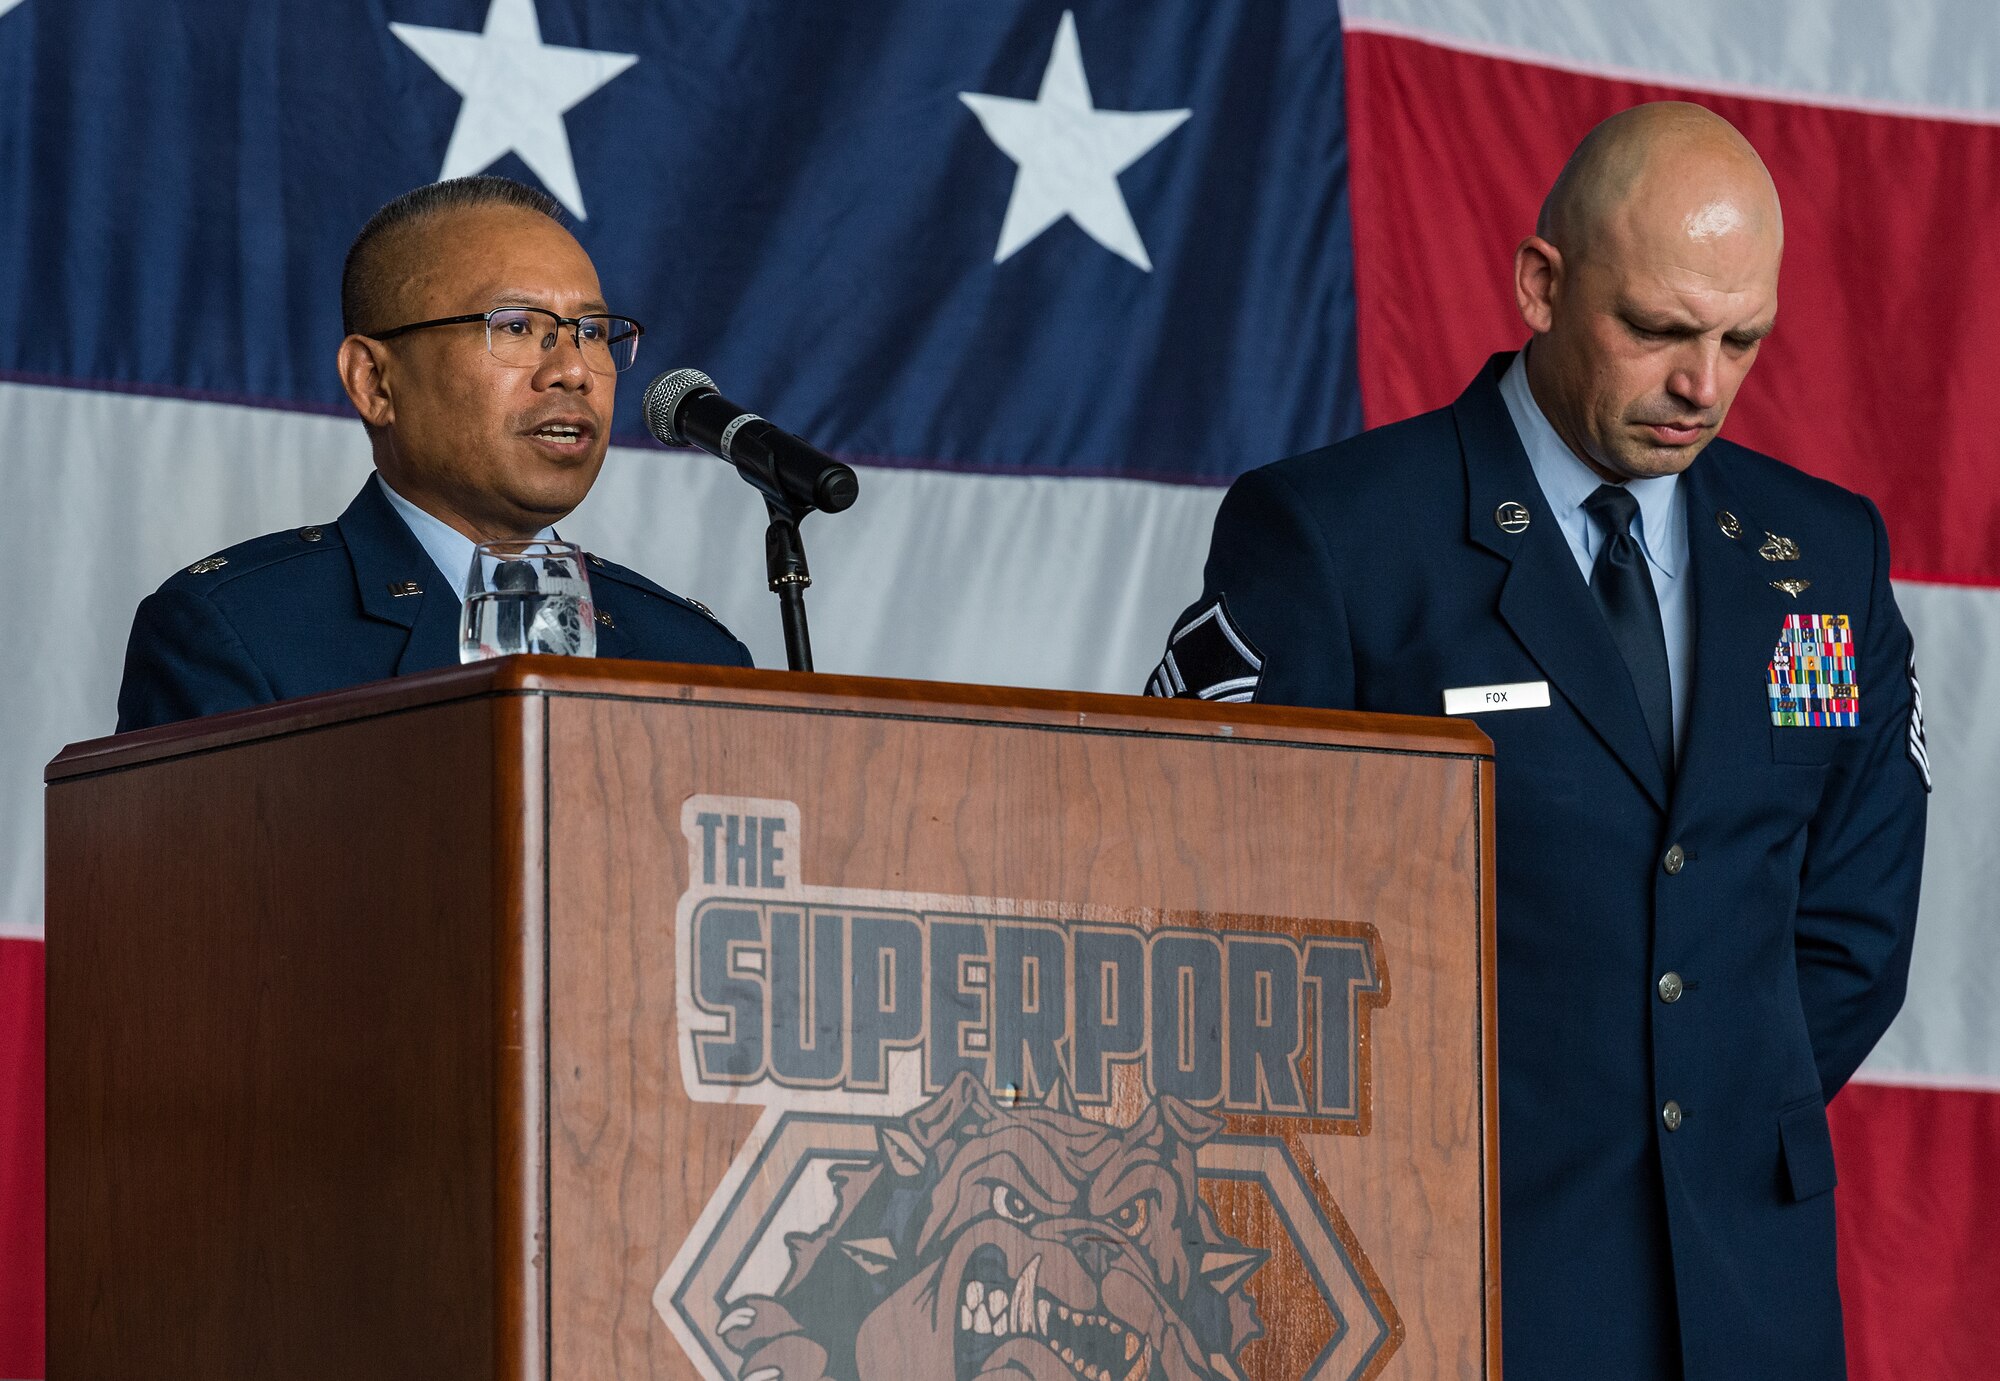 Lt. Col. Abner Valenzuela, left, 436th Airlift Wing chaplain, gives the invocation during the 436th AW Assumption of Command ceremony on Dover Air Force Base, Delaware, June 4, 2021. Upon taking command, Col. Matthew Husemann became the wing’s 36th commander. Standing next to Valenzuela is Master Sgt. Jason Fox, 436th Aerial Port Squadron passenger services and fleet operations superintendent, who served as the ceremony narrator. (U.S. Air Force photo by Roland Balik)